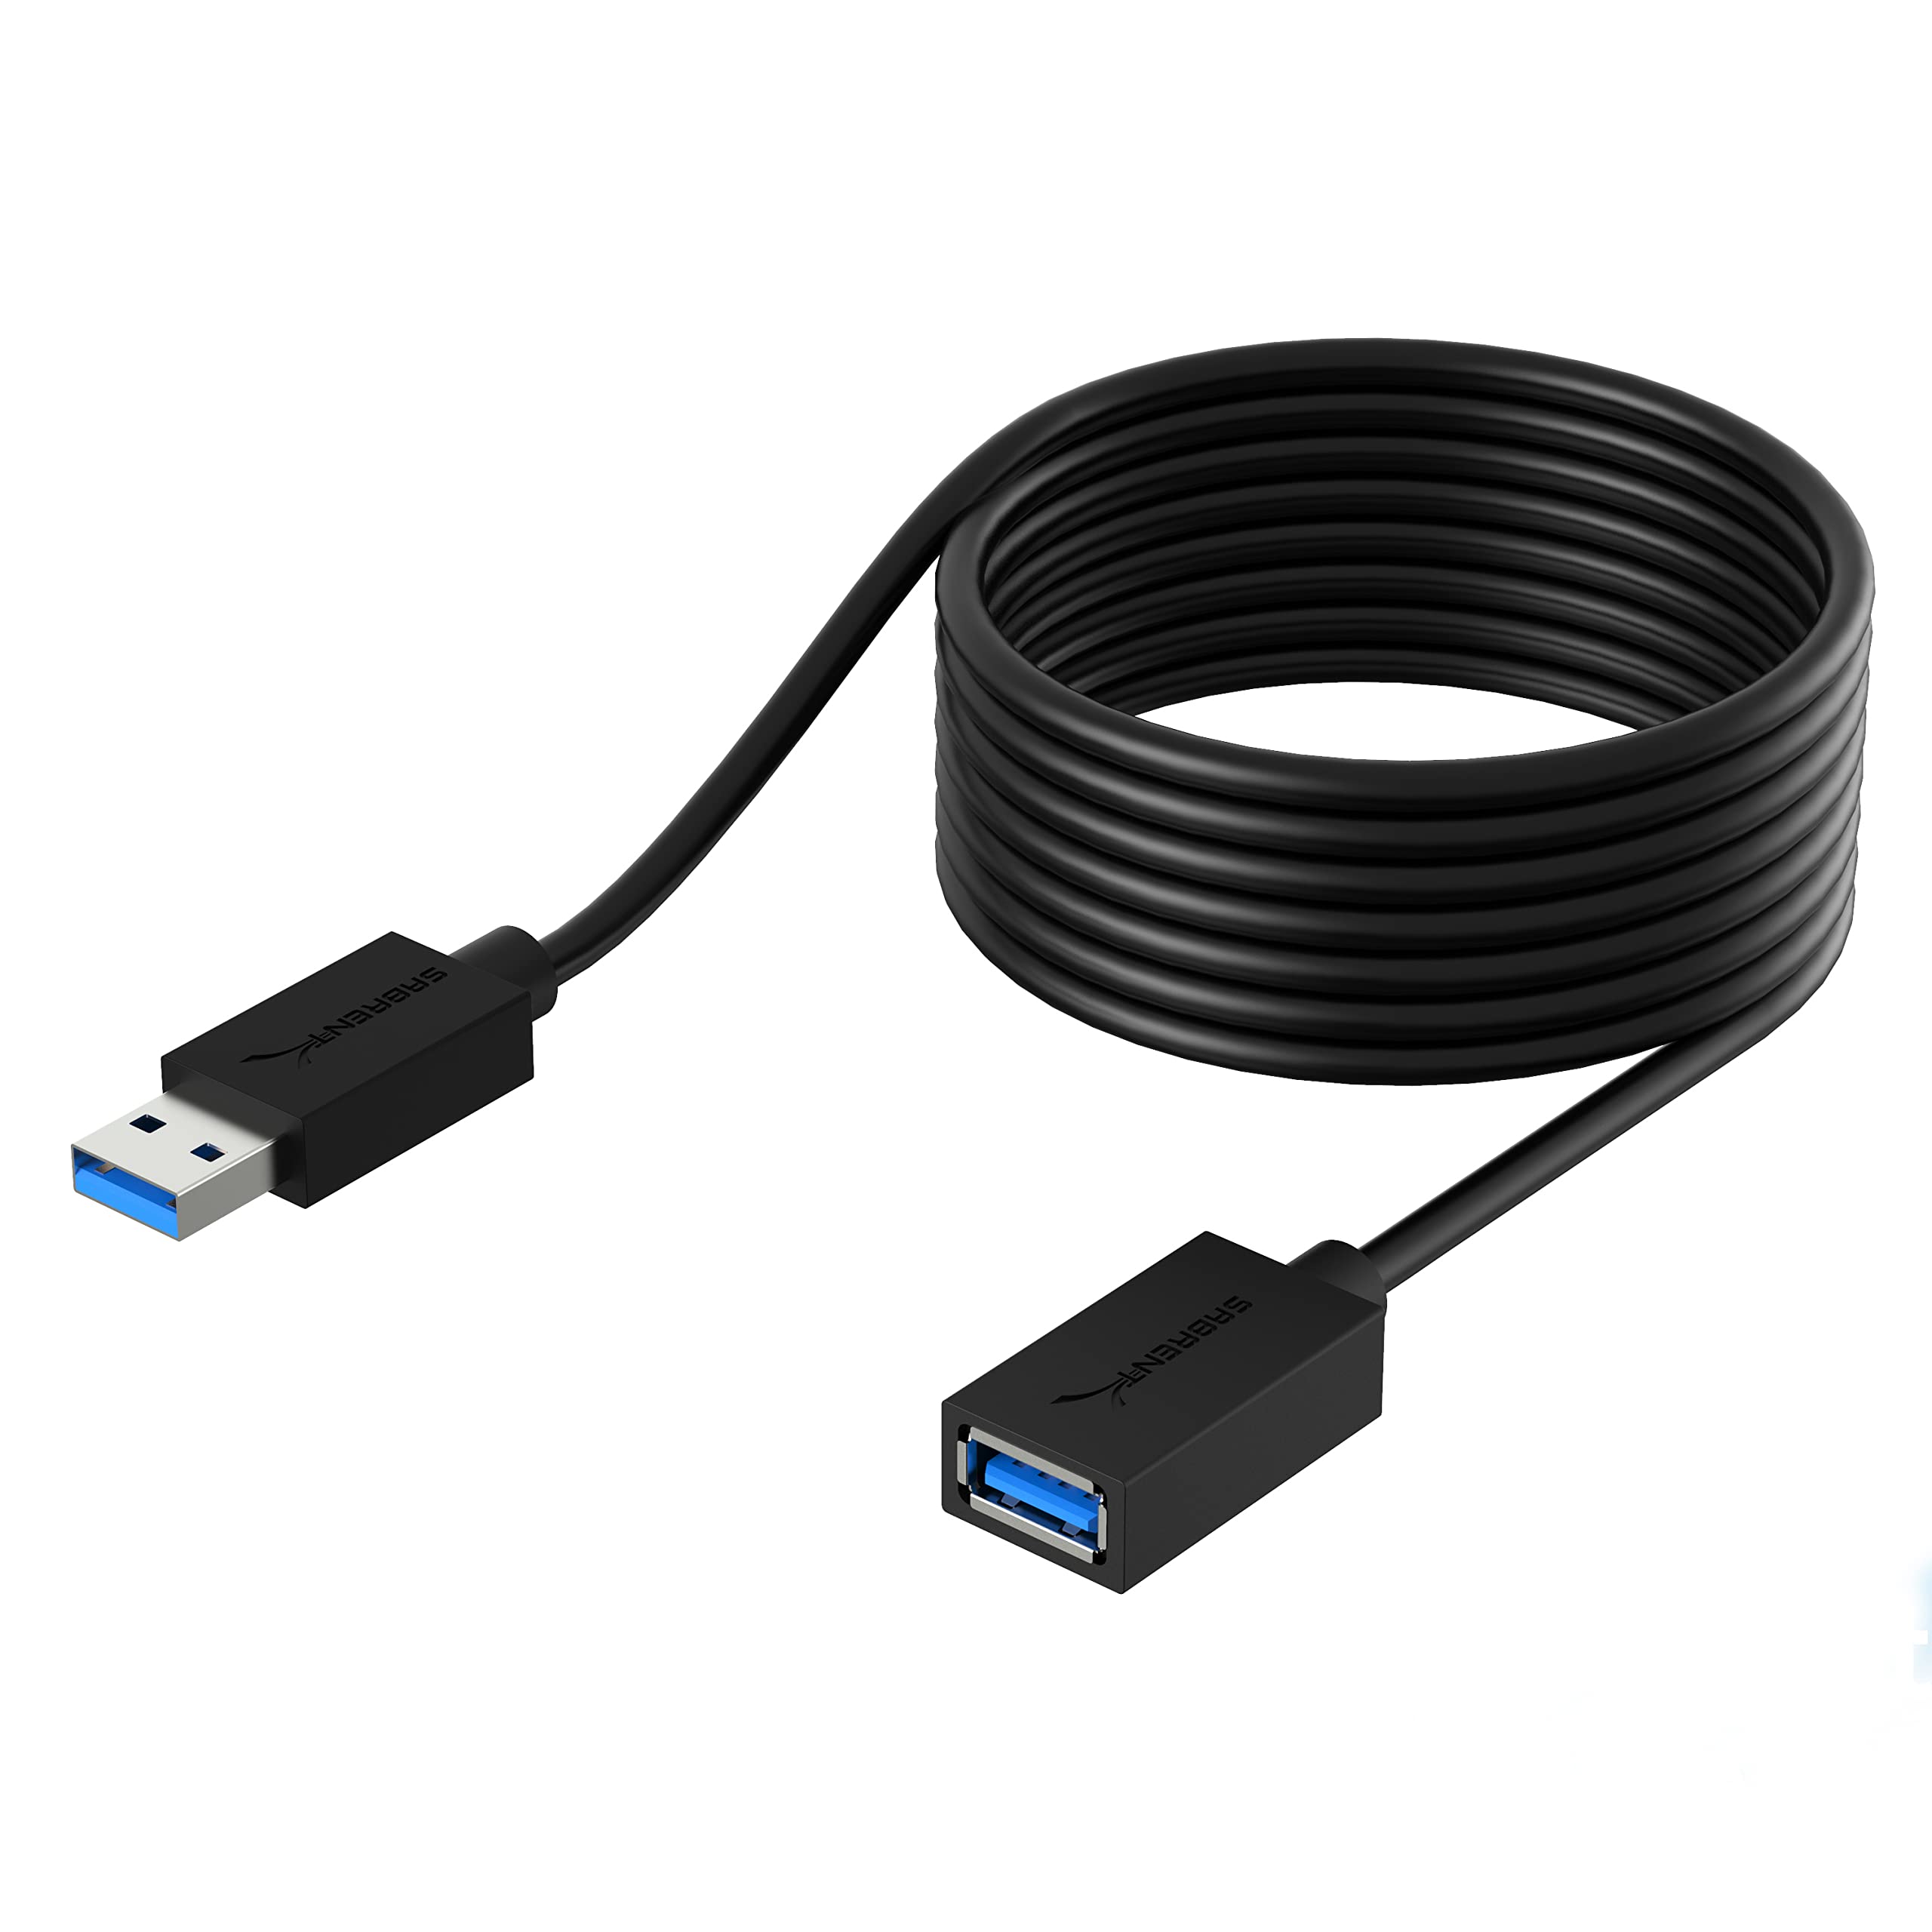 SABRENT USB 3.0 Extension Cable 22AWG A Male to A Female, 10 Feet [Black], for Data Transfer/Charging, Compatible with PCs, Laptops, Printers (CB-3010)